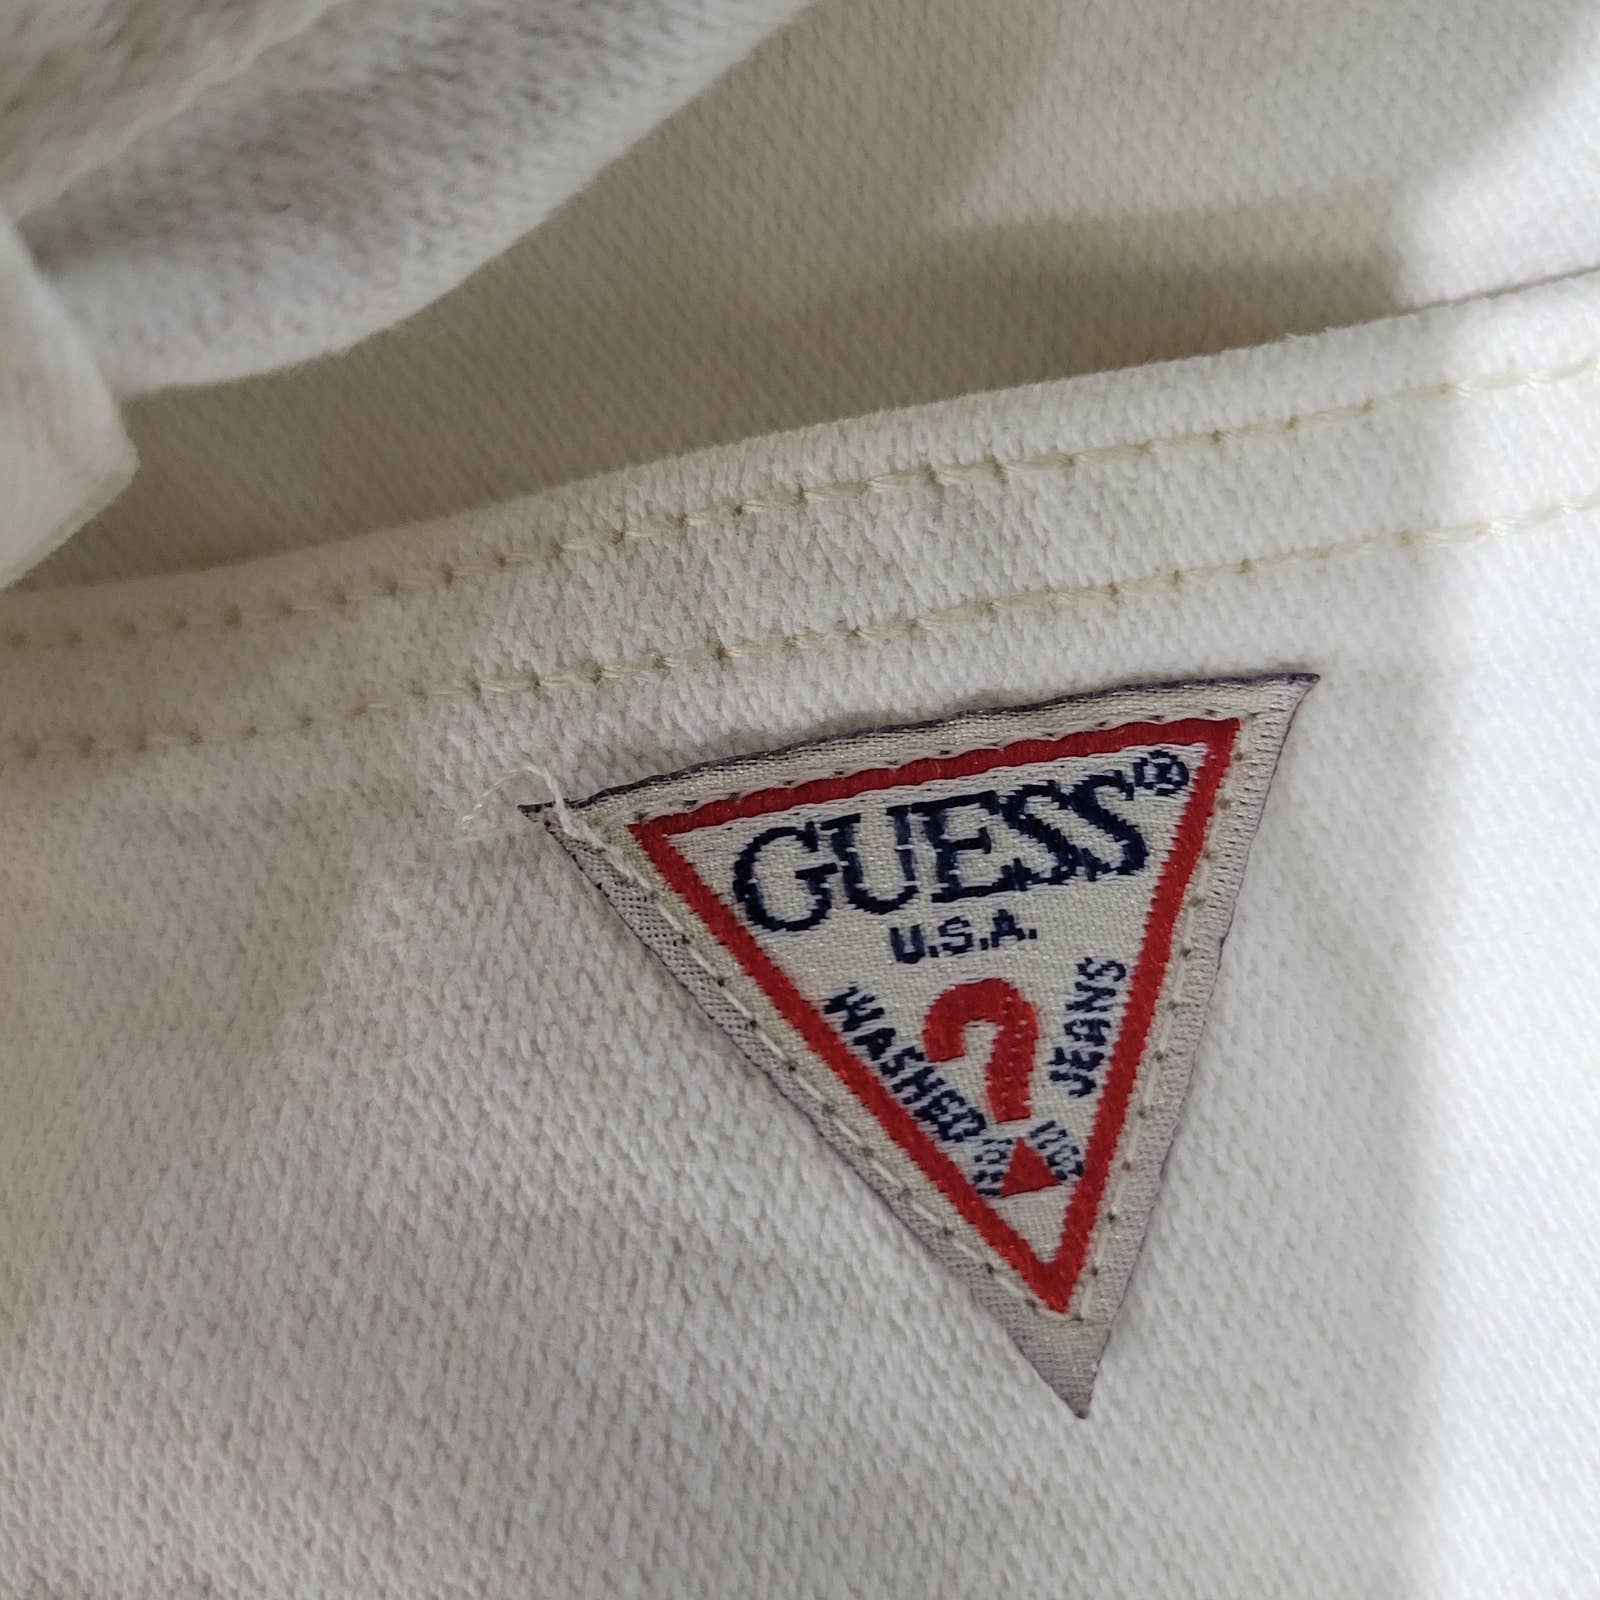 Vintage Guess Jeans Off White Tapered High Rise Triangle Logo USA Rigid Cotton Denim Classic Slim Size 25